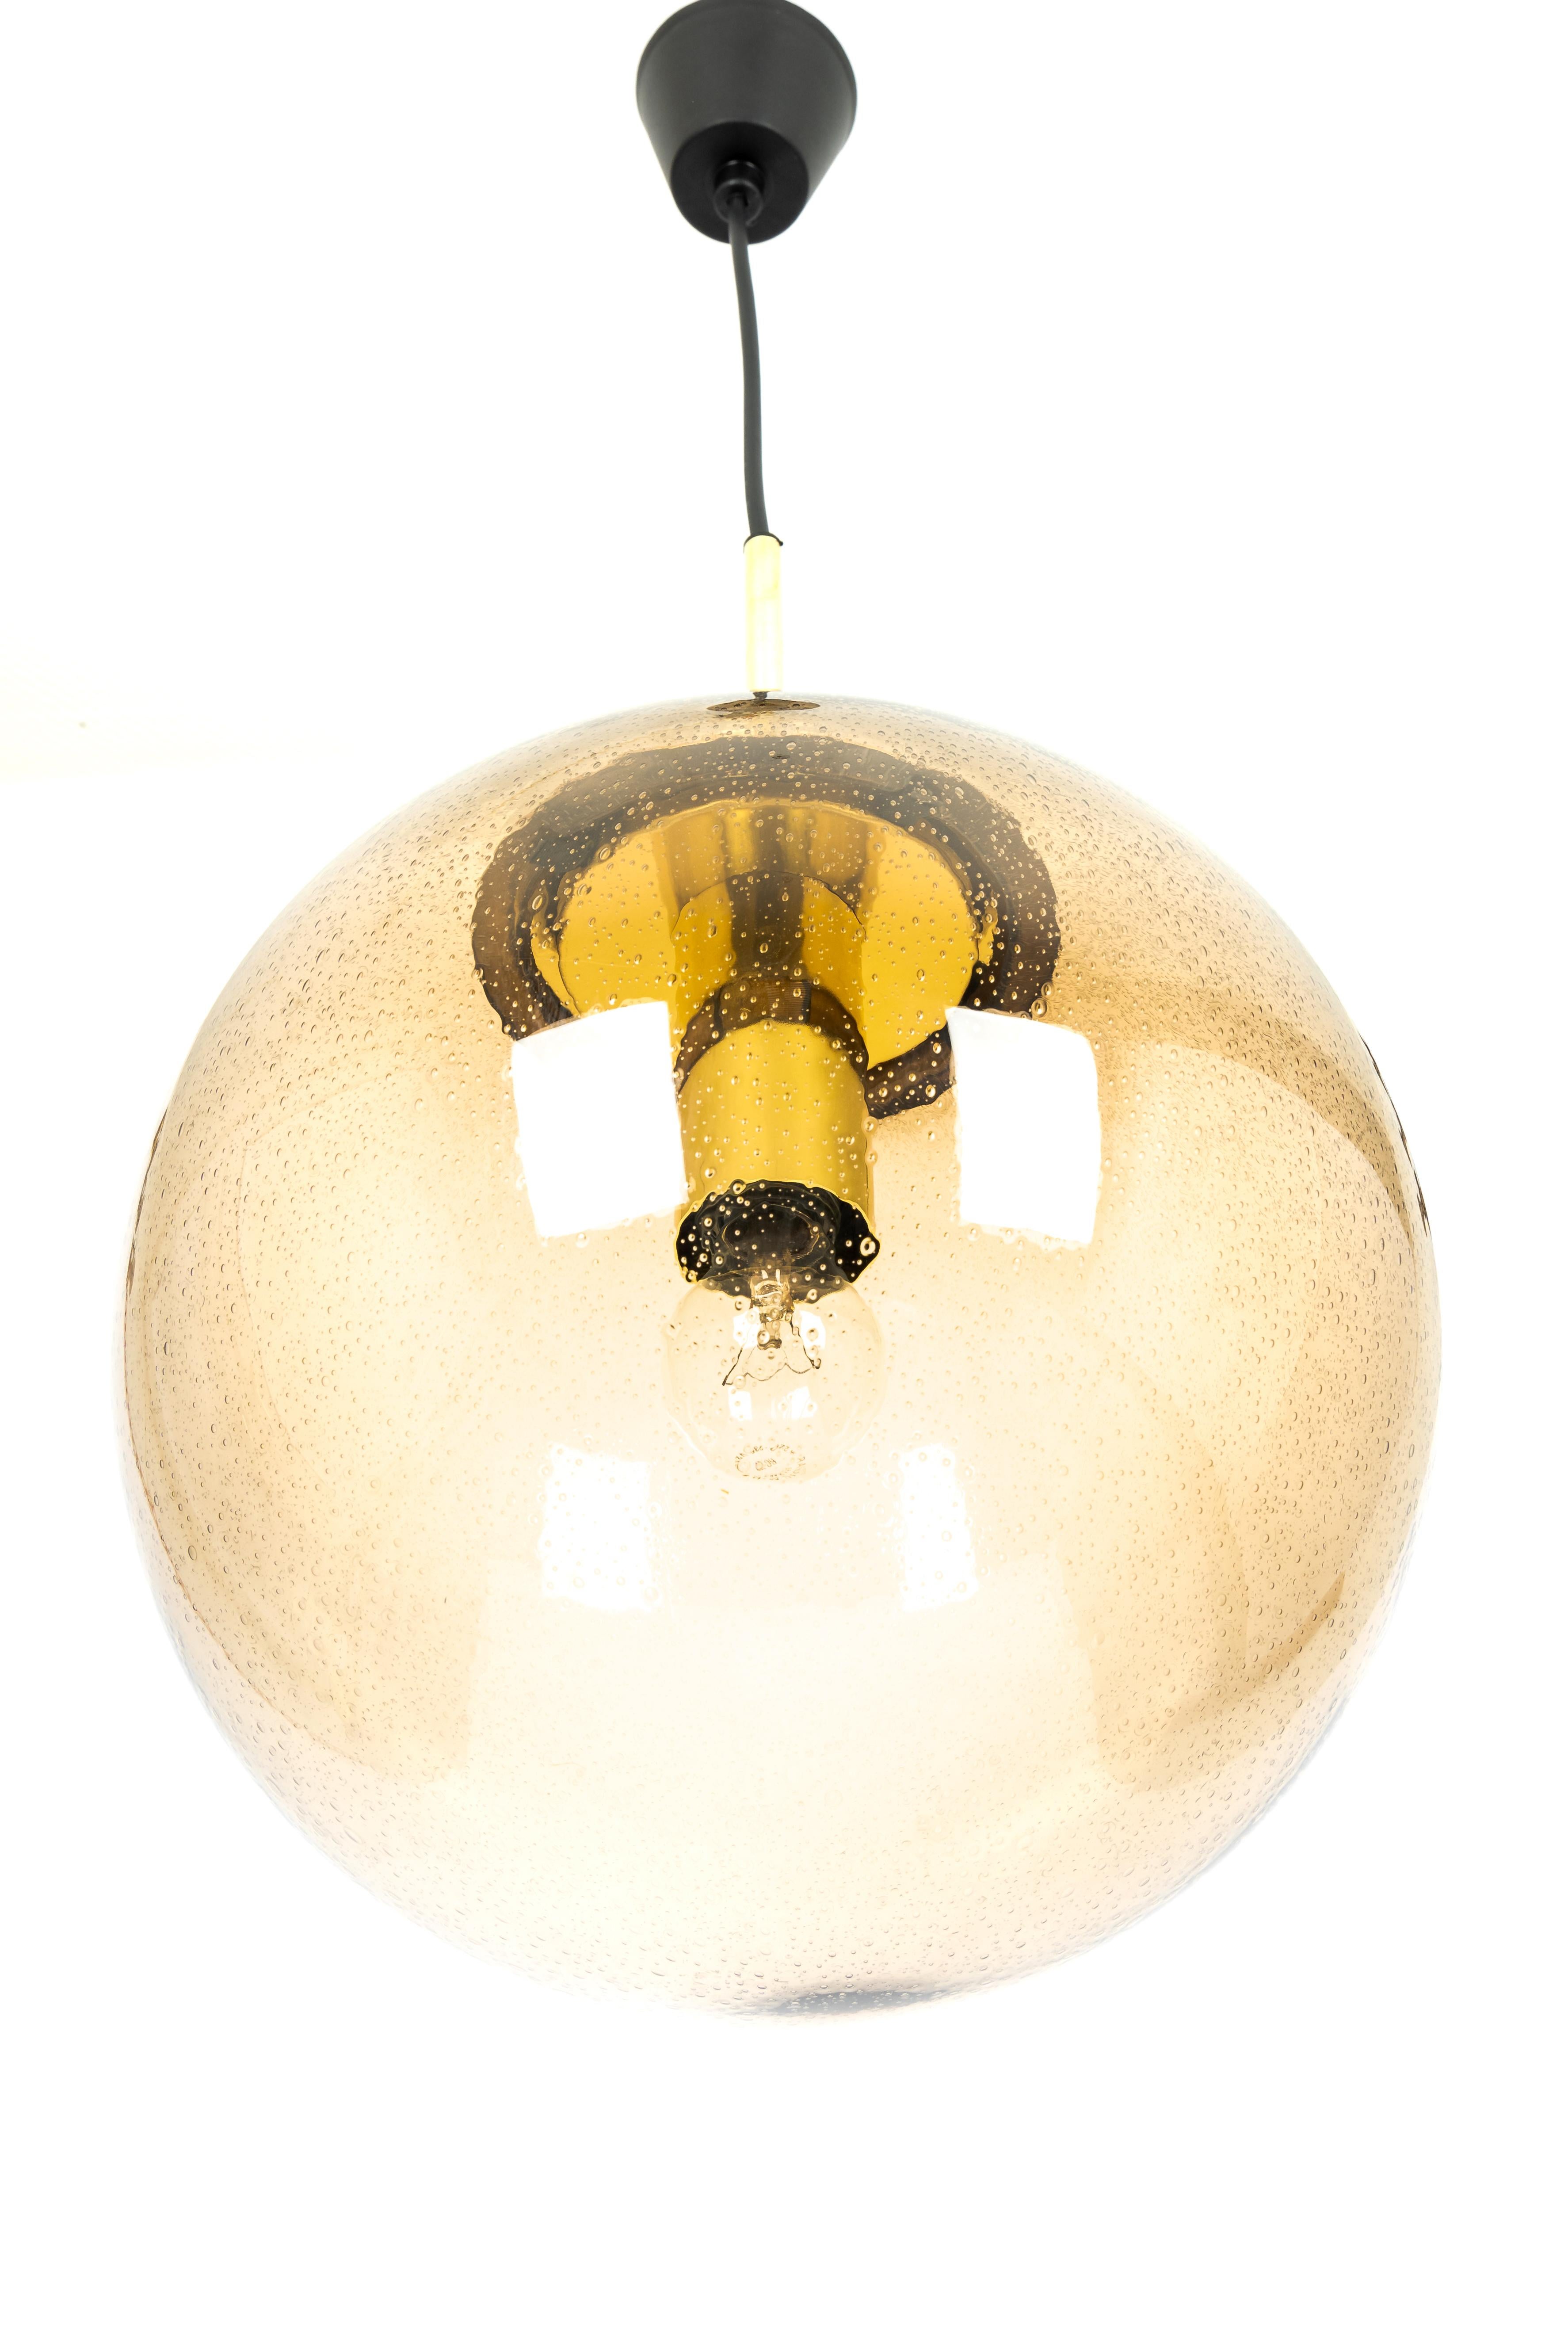 Mid-Century Modern 1 of 6 Limburg Brass with Smoked Glass Ball Pendant, Germany, 1970s For Sale